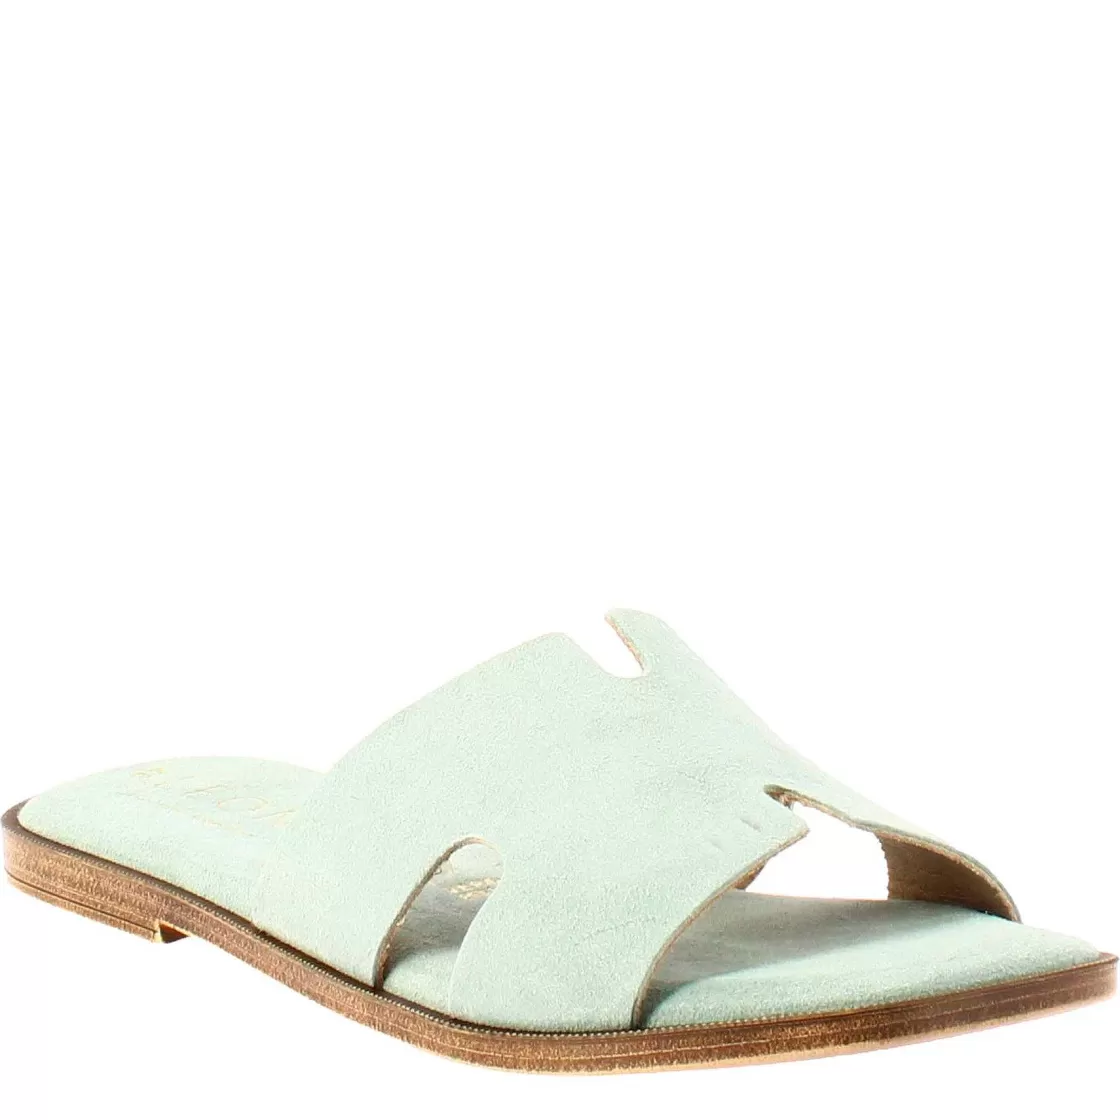 Leonardo Women'S H-Shaped Sandals In Green Suede Leather Hot